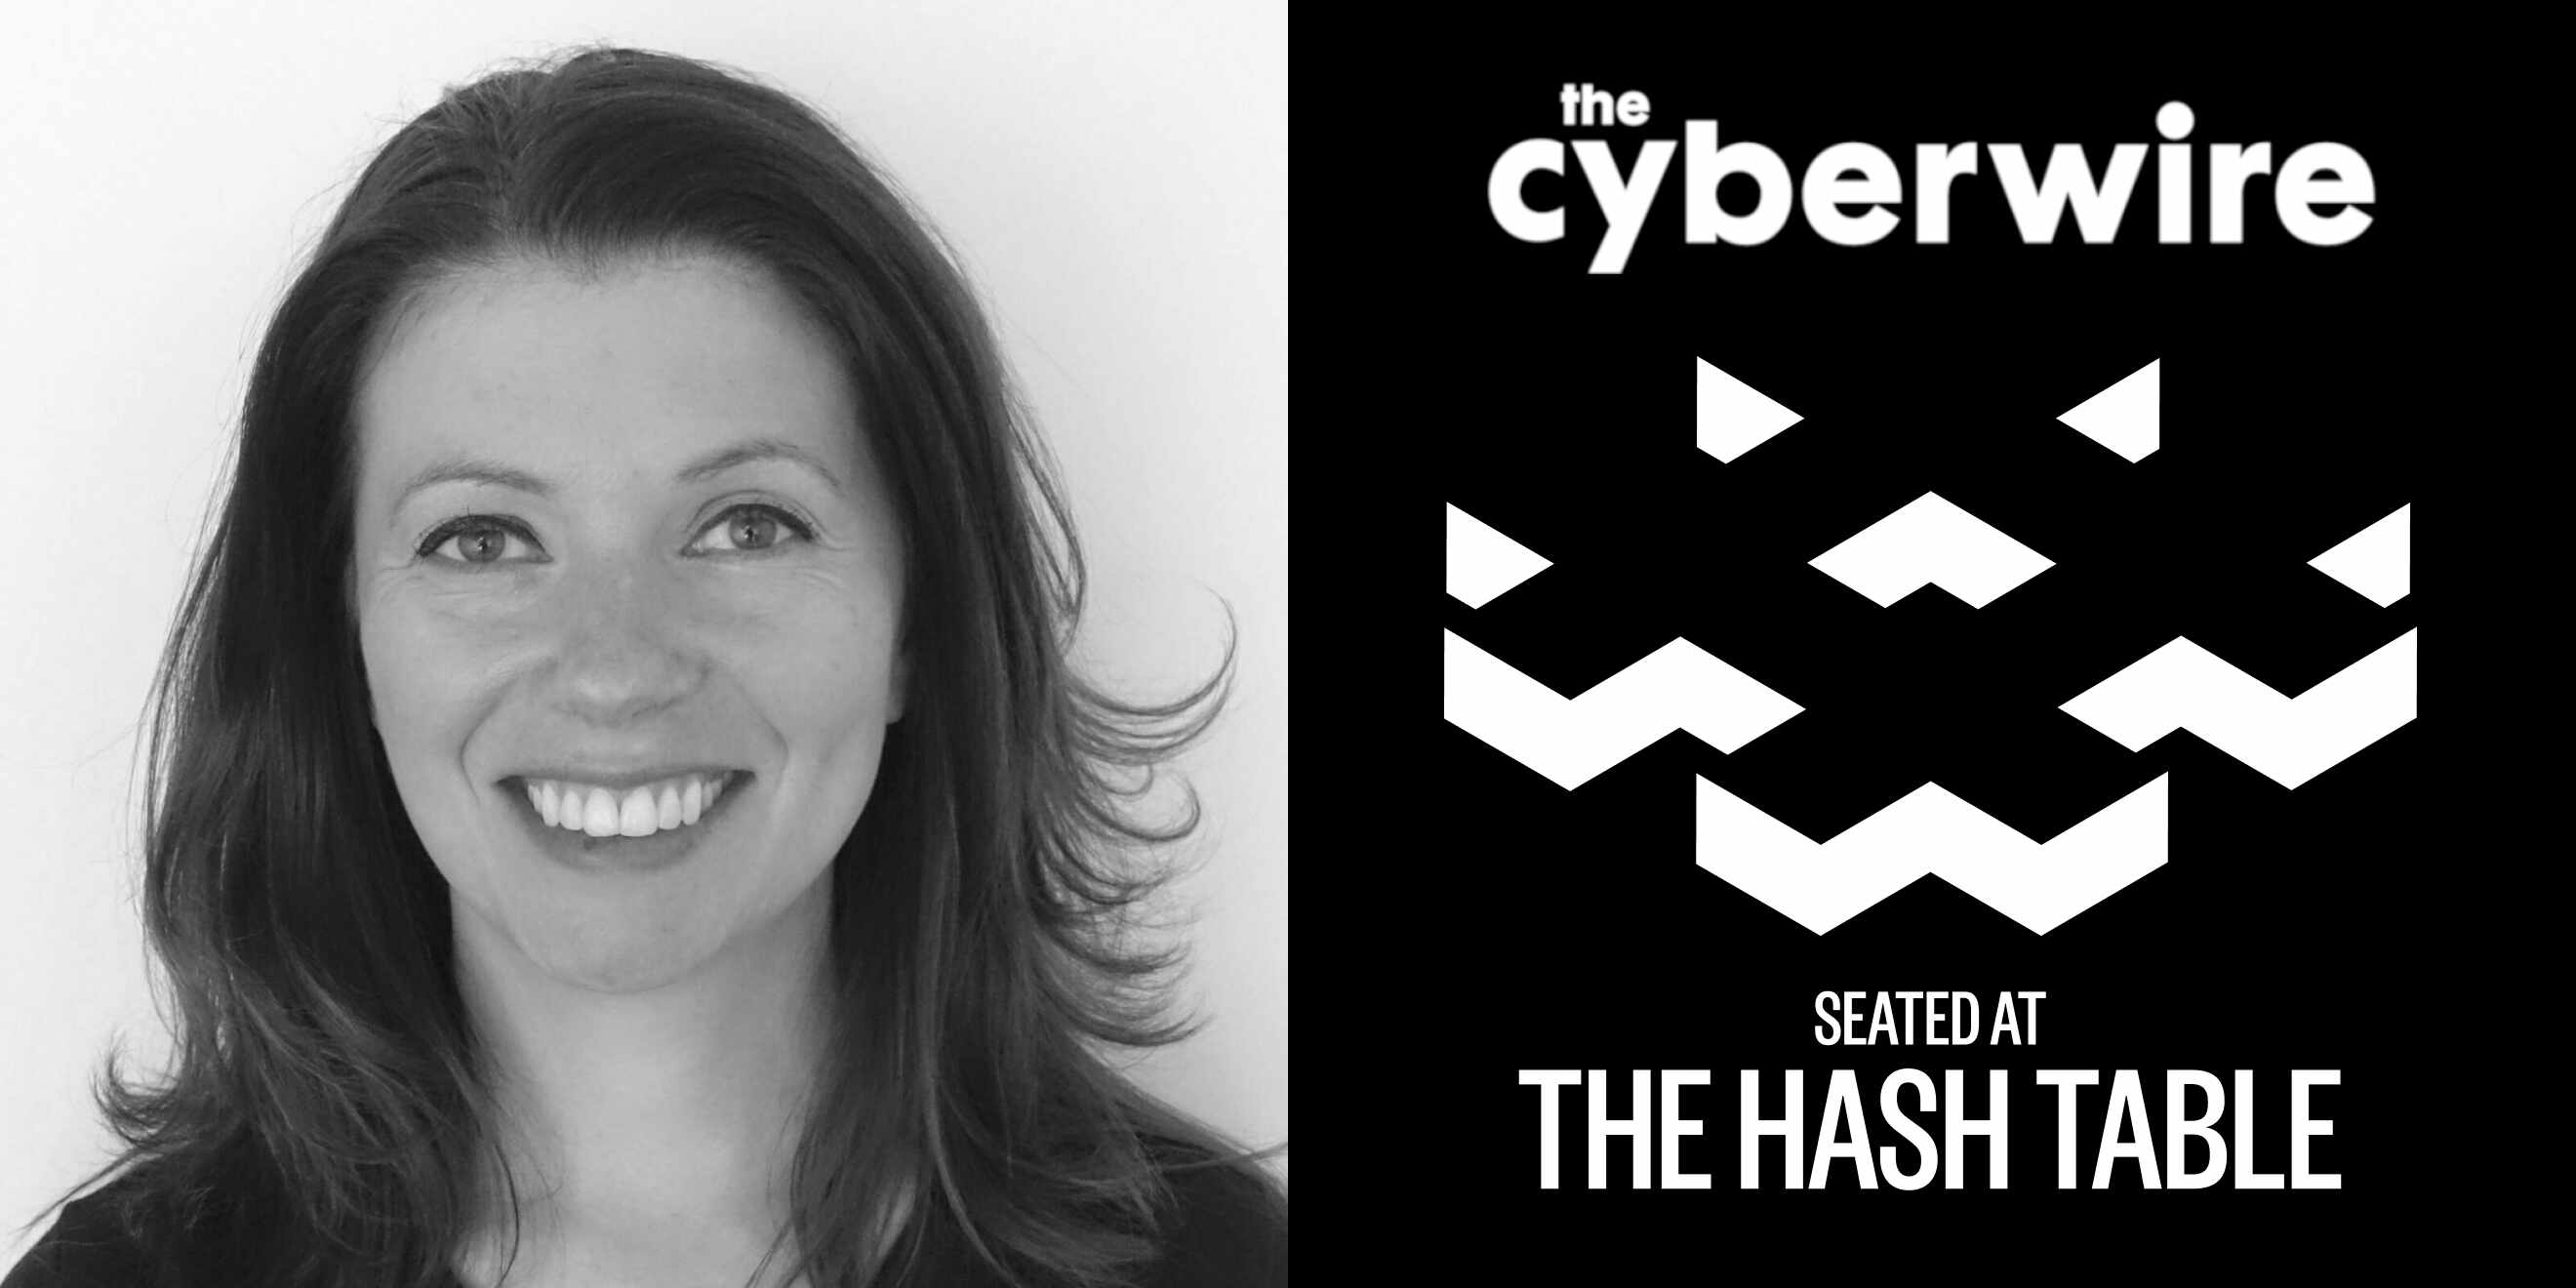 CISO of Aviatrix joins the CyberWire’s Hash Table panel of distinguished cybersecurity experts.